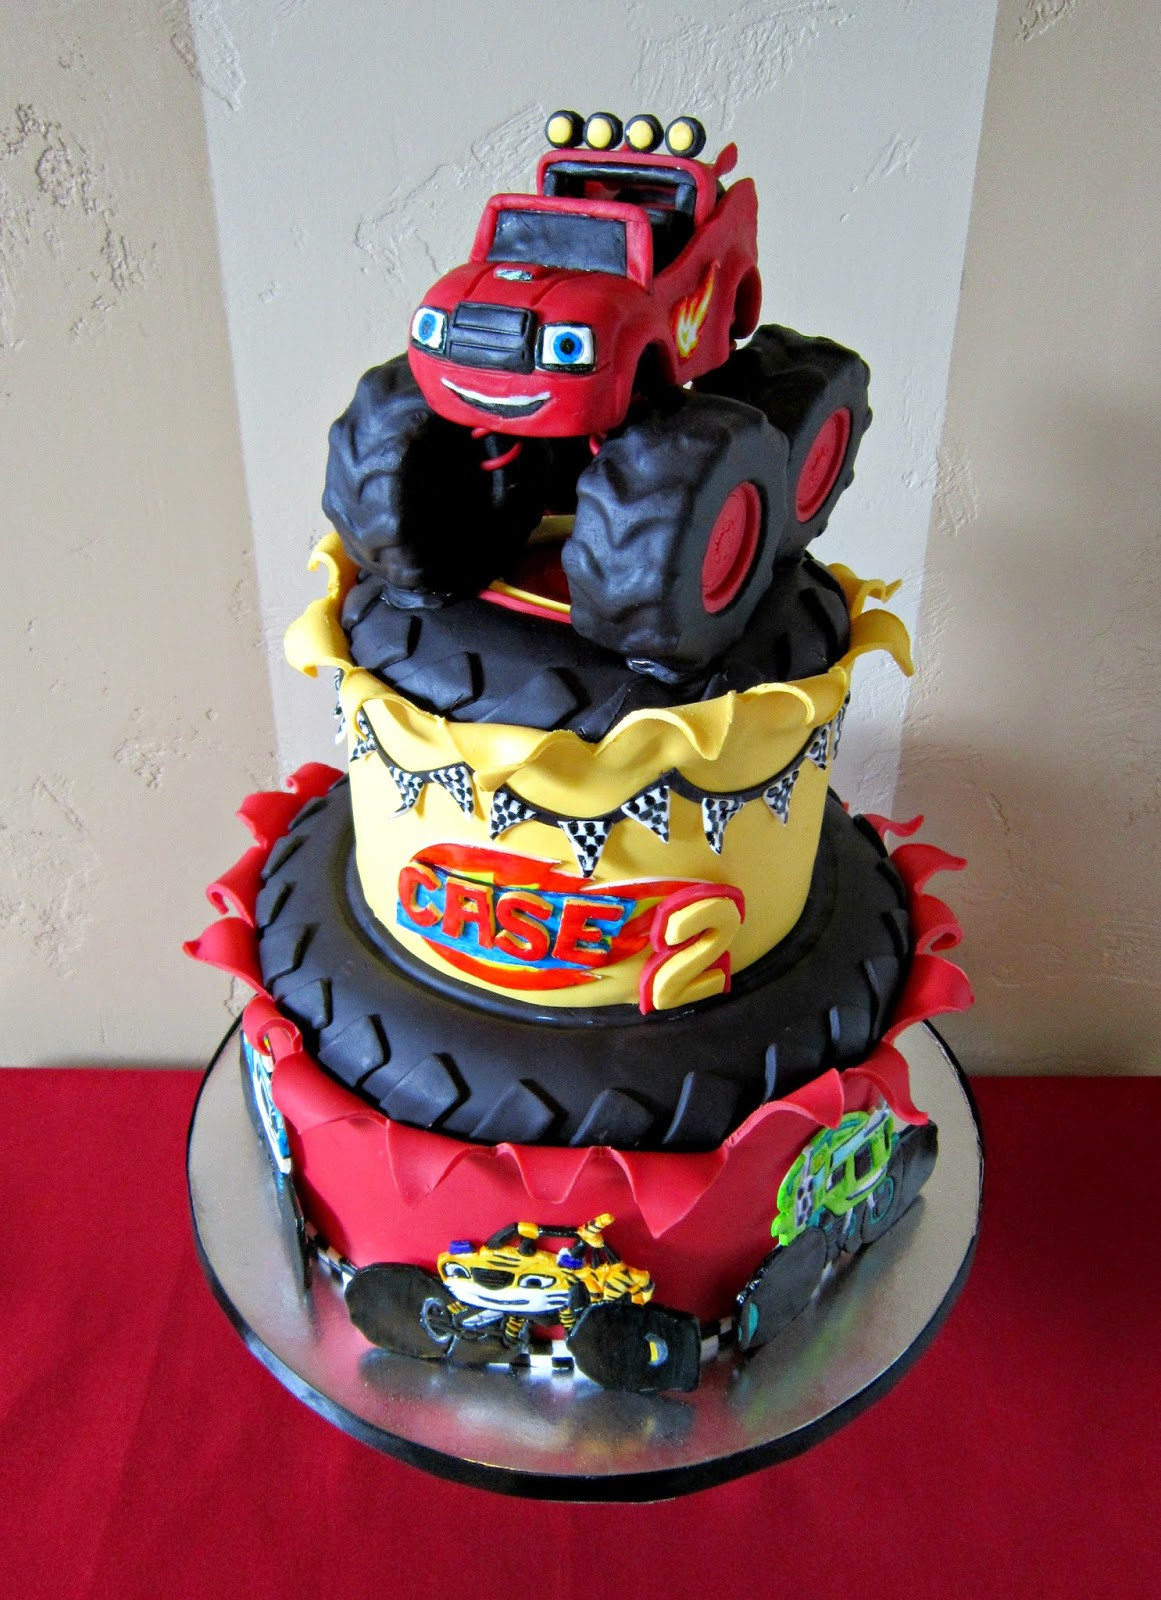 Blaze Birthday Cake
 Delectable Cakes "Blaze and the Monster Machine s